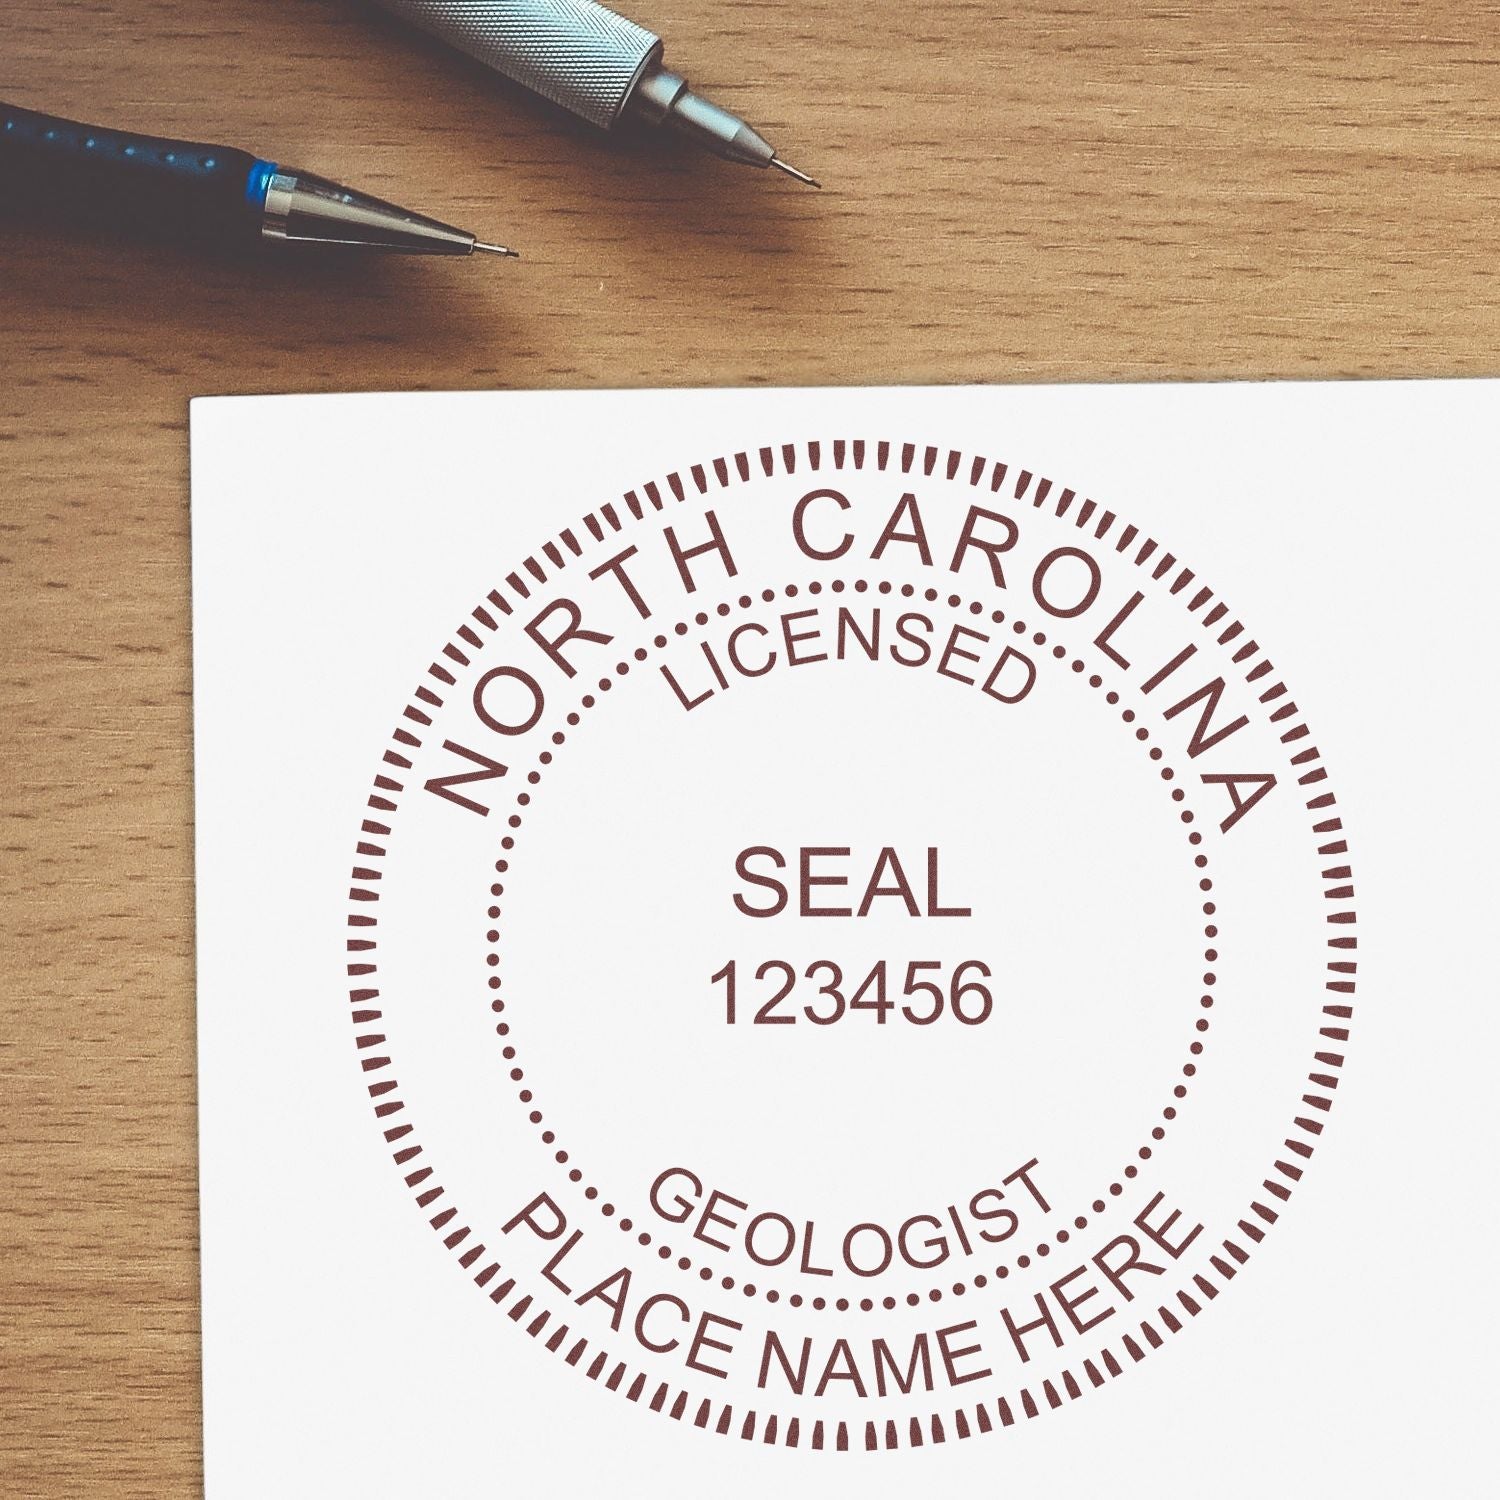 Another Example of a stamped impression of the Digital North Carolina Geologist Stamp, Electronic Seal for North Carolina Geologist on a office form